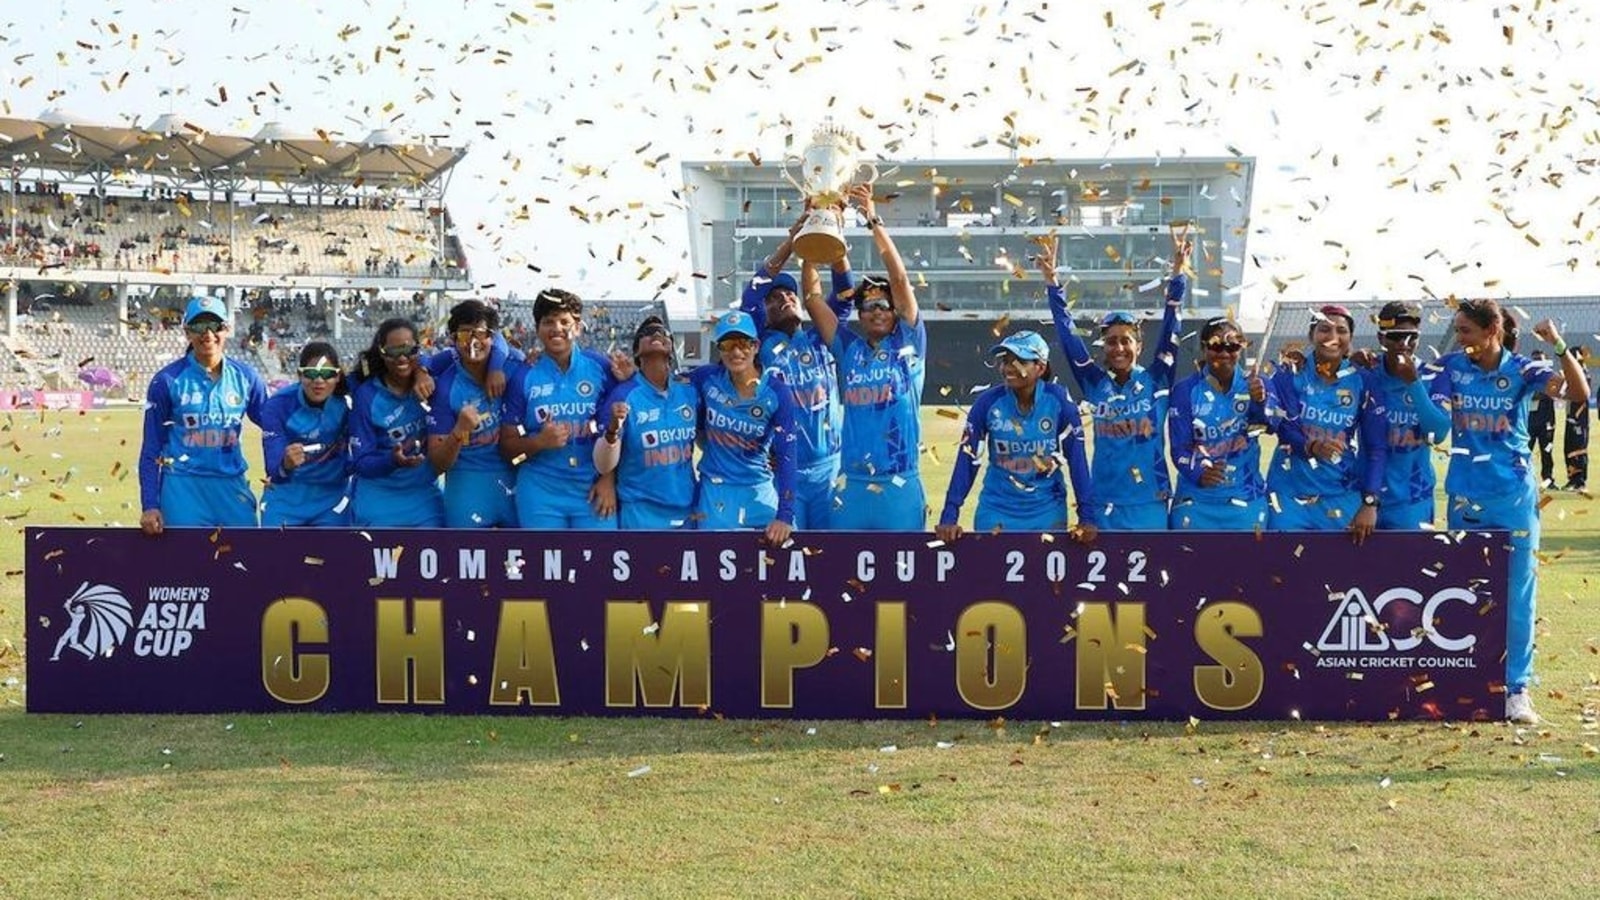 bcci-announces-equal-pay-for-centrally-contracted-men-and-women-indian-cricketers-in-historic-move